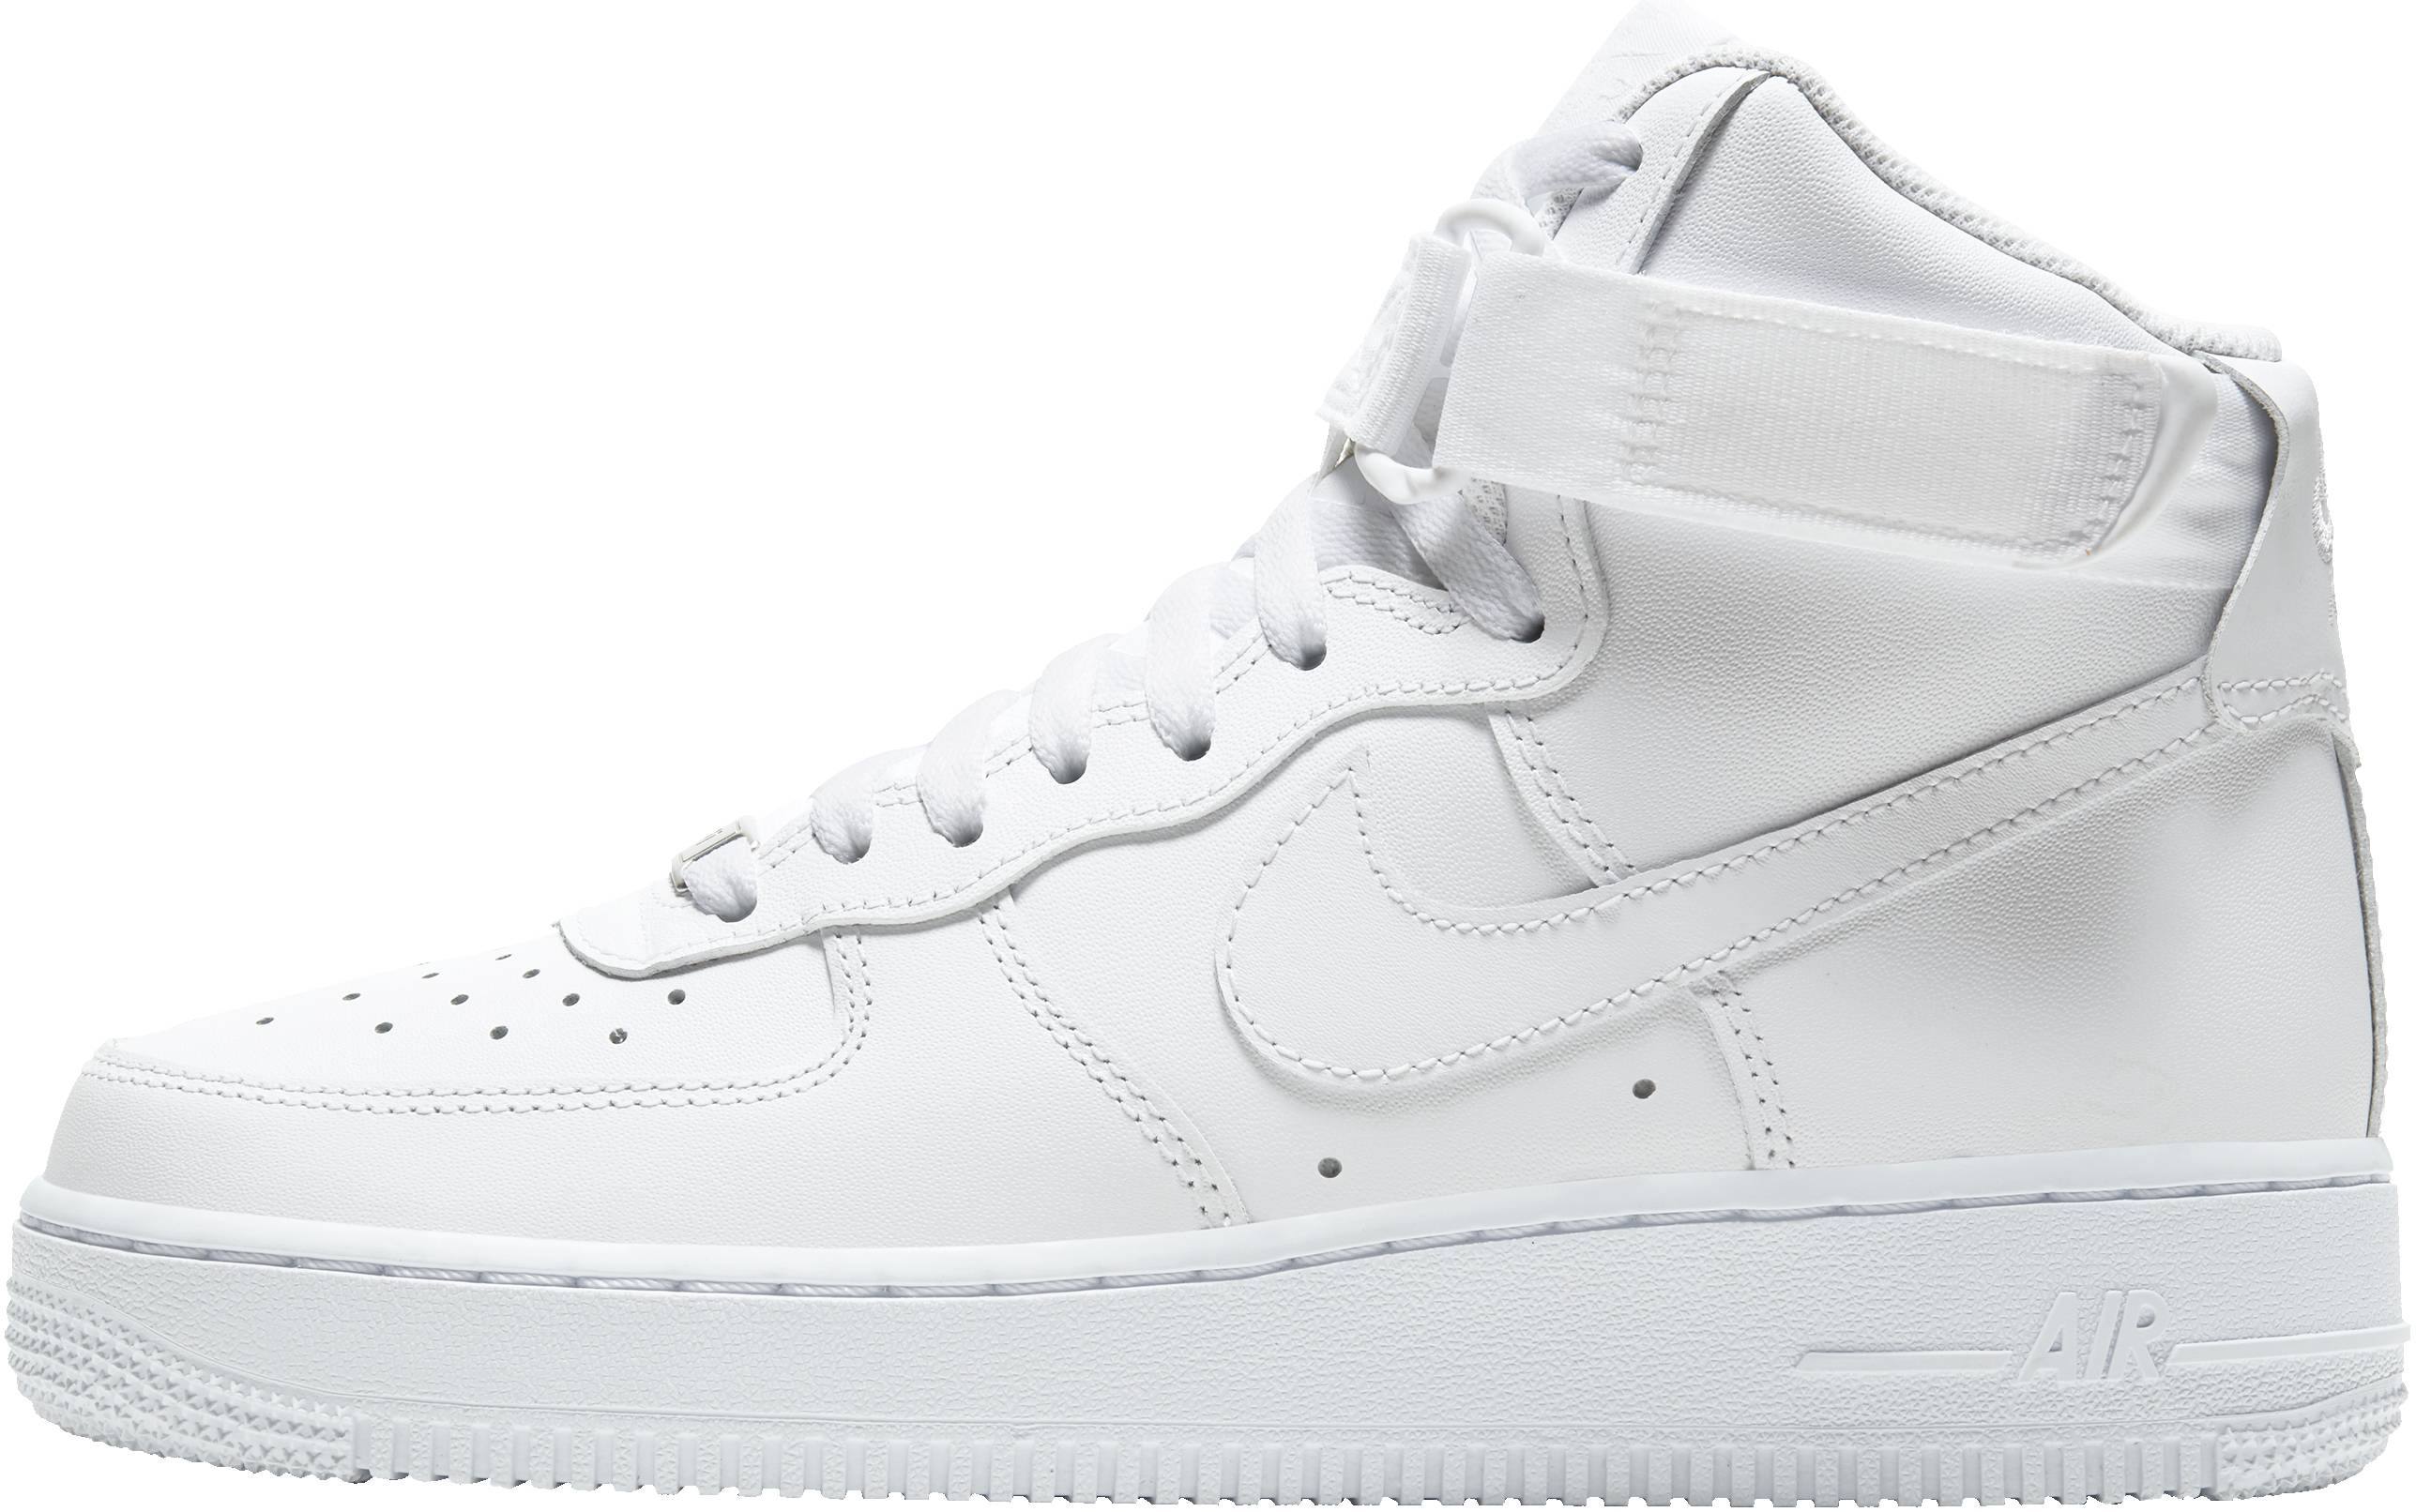 $100 + Review of Nike Air Force 1 High 